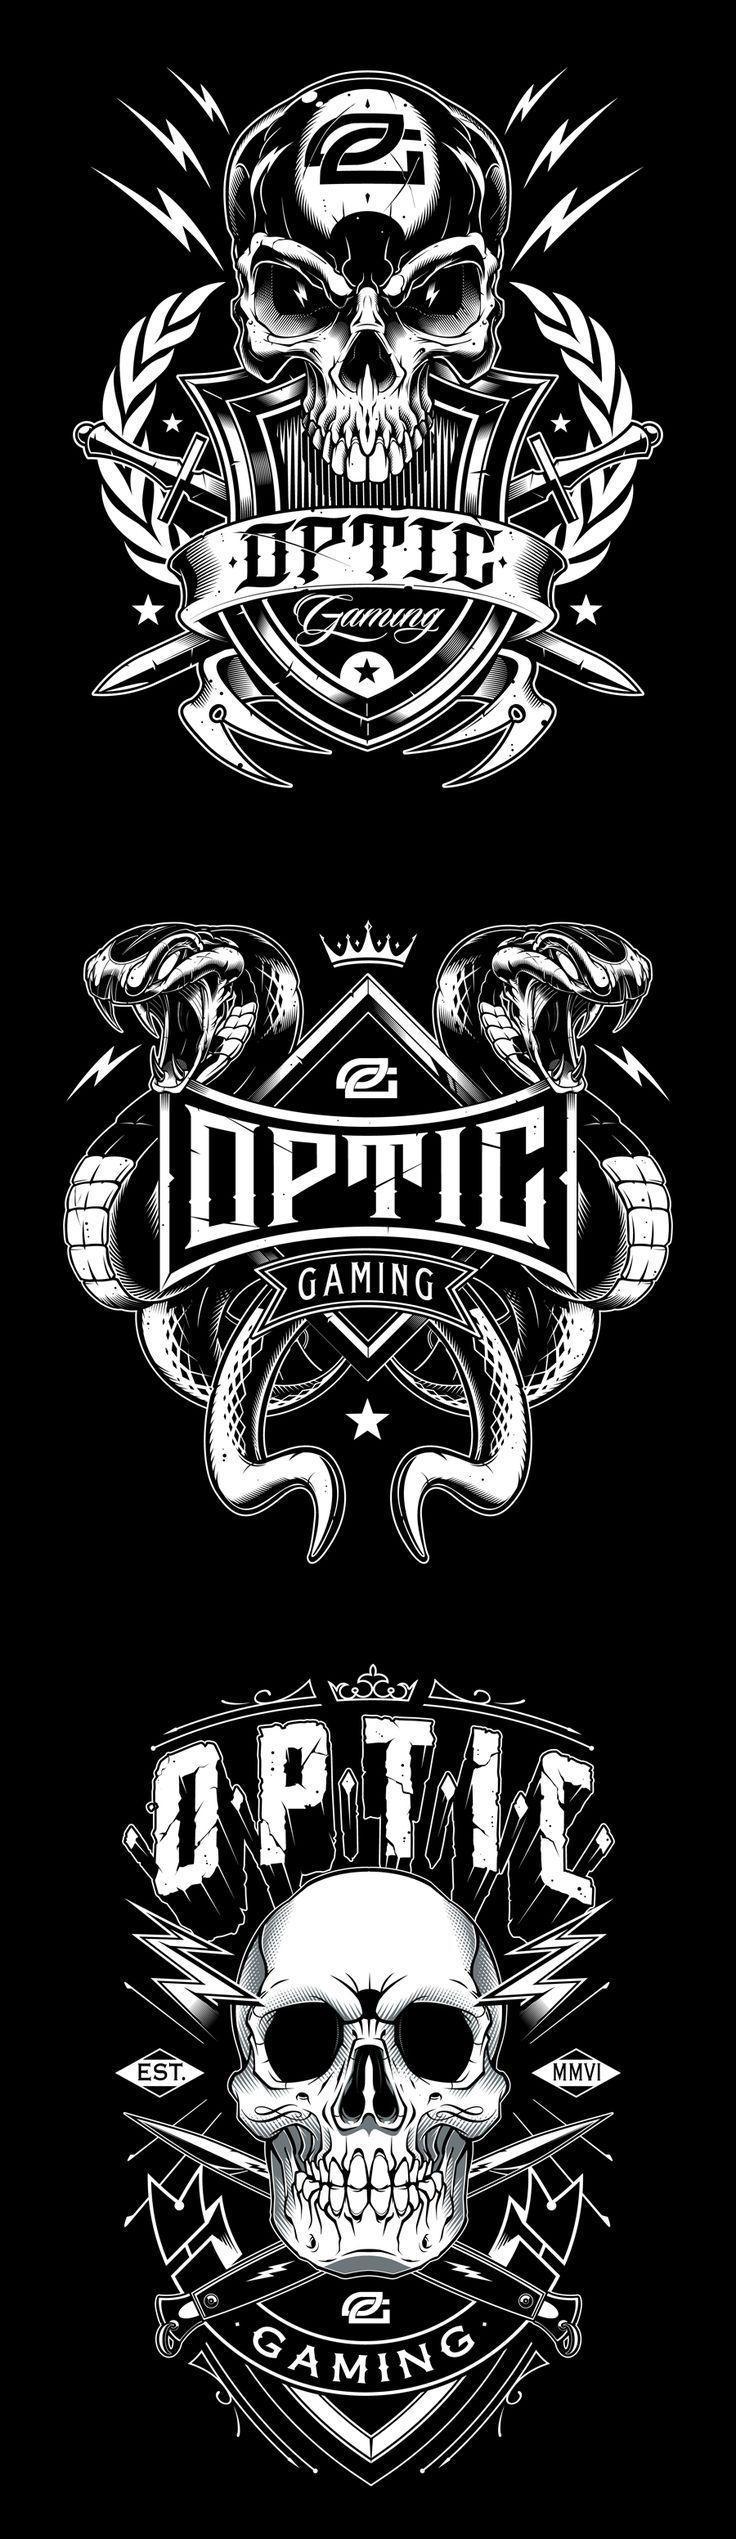 best image about OpTic Gaming♡. Download video